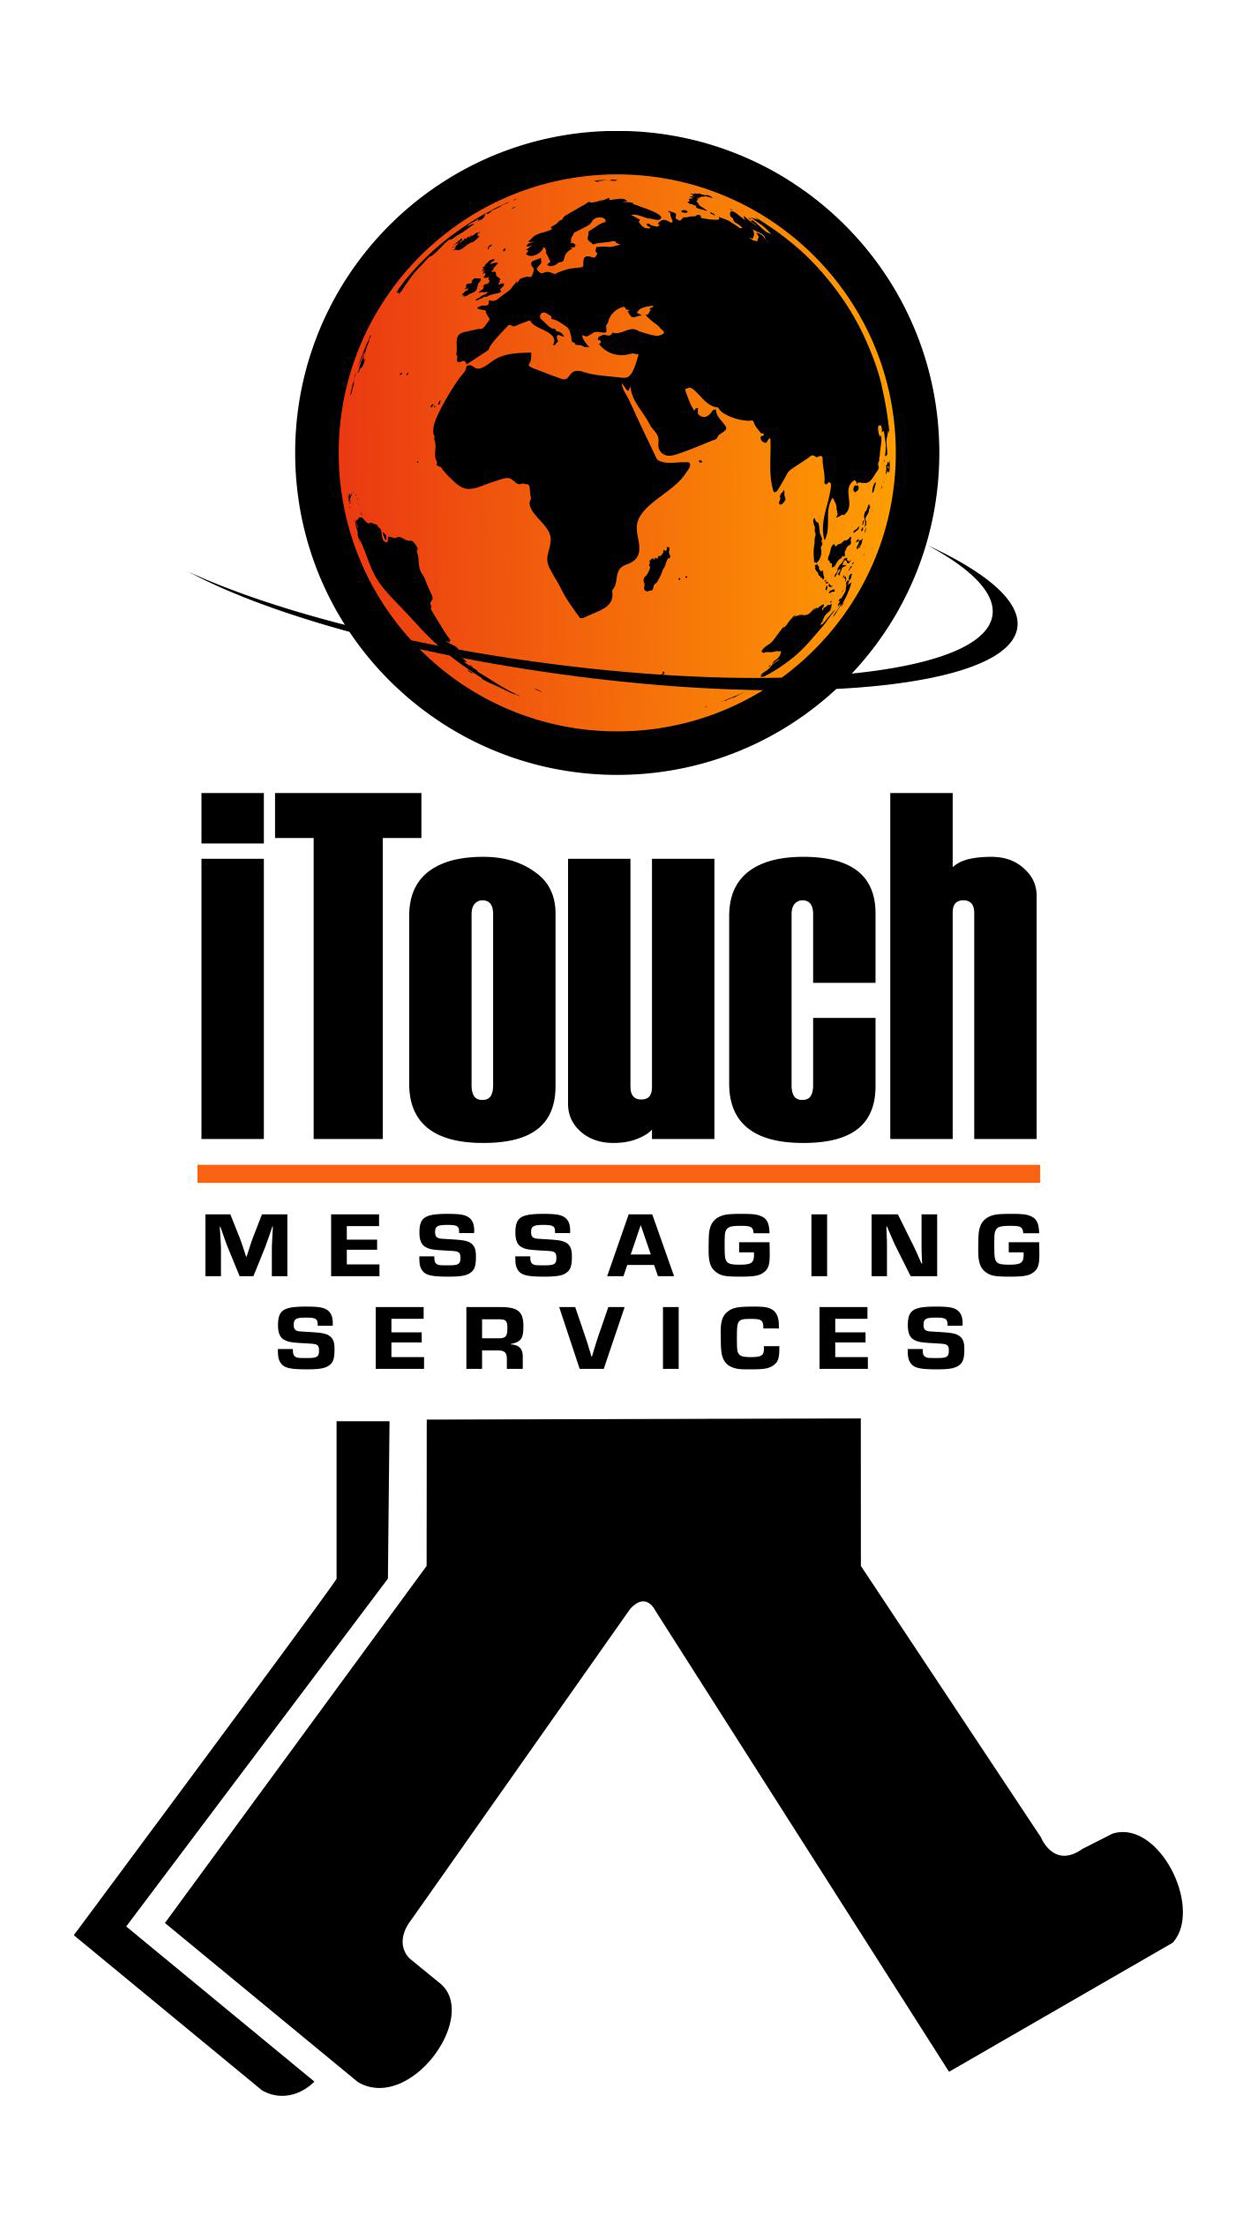 iTouch Messaging Services (Pty) Ltd